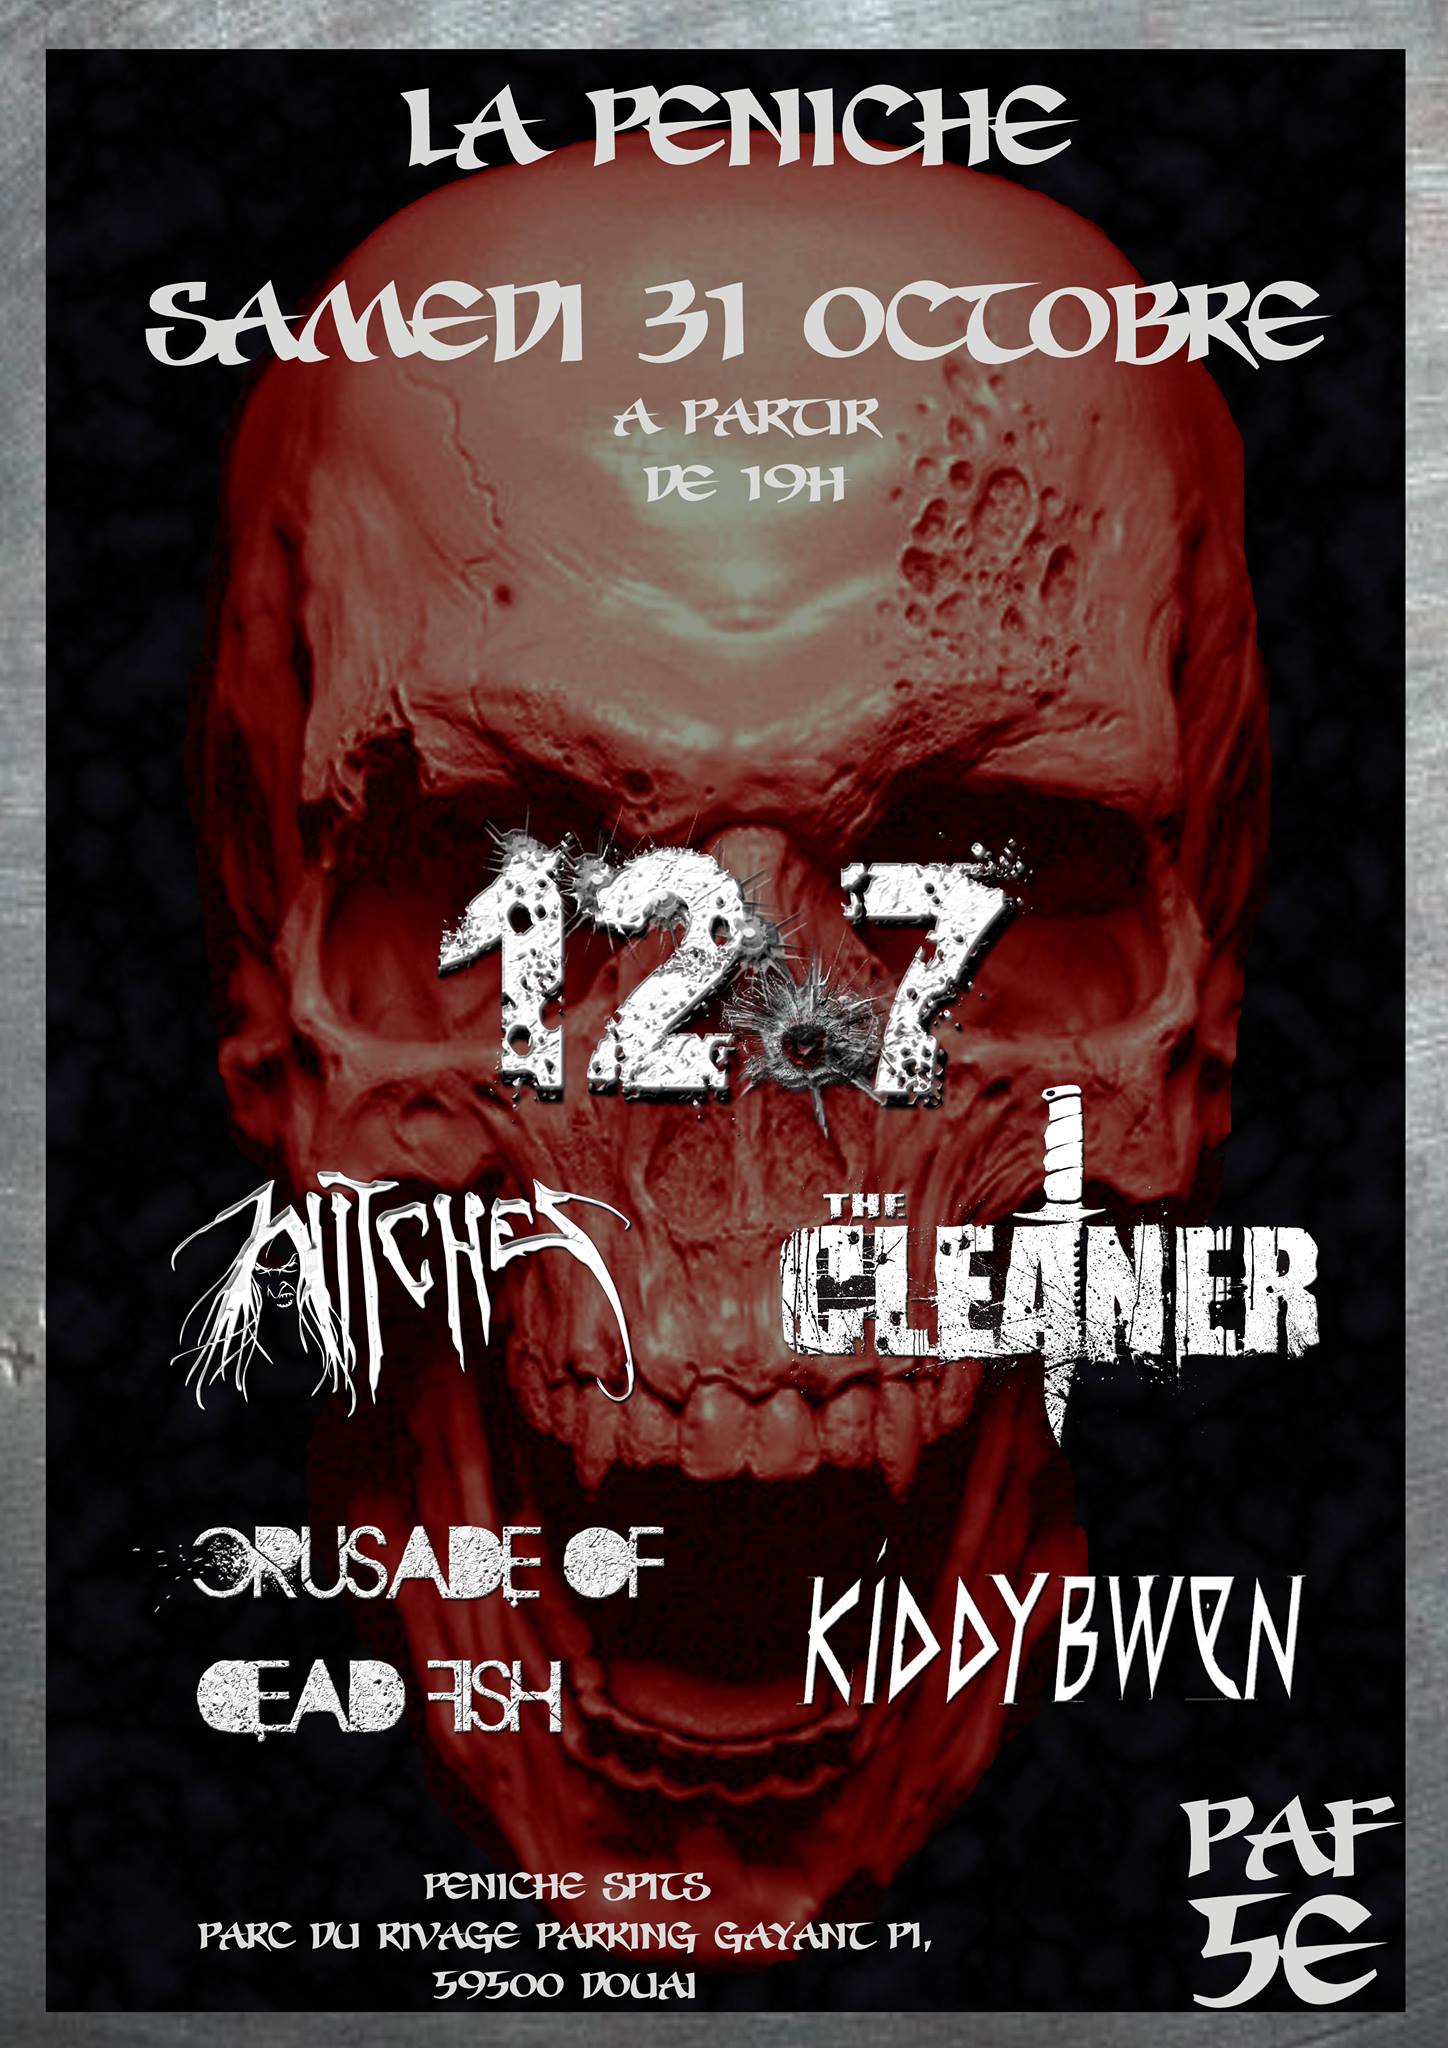 Witches flyer 12.7 + Witches + The Cleaner + Crusade of Dead Fish + Kiddybwen @ European Tour La Péniche Igelrock Douai (62), France